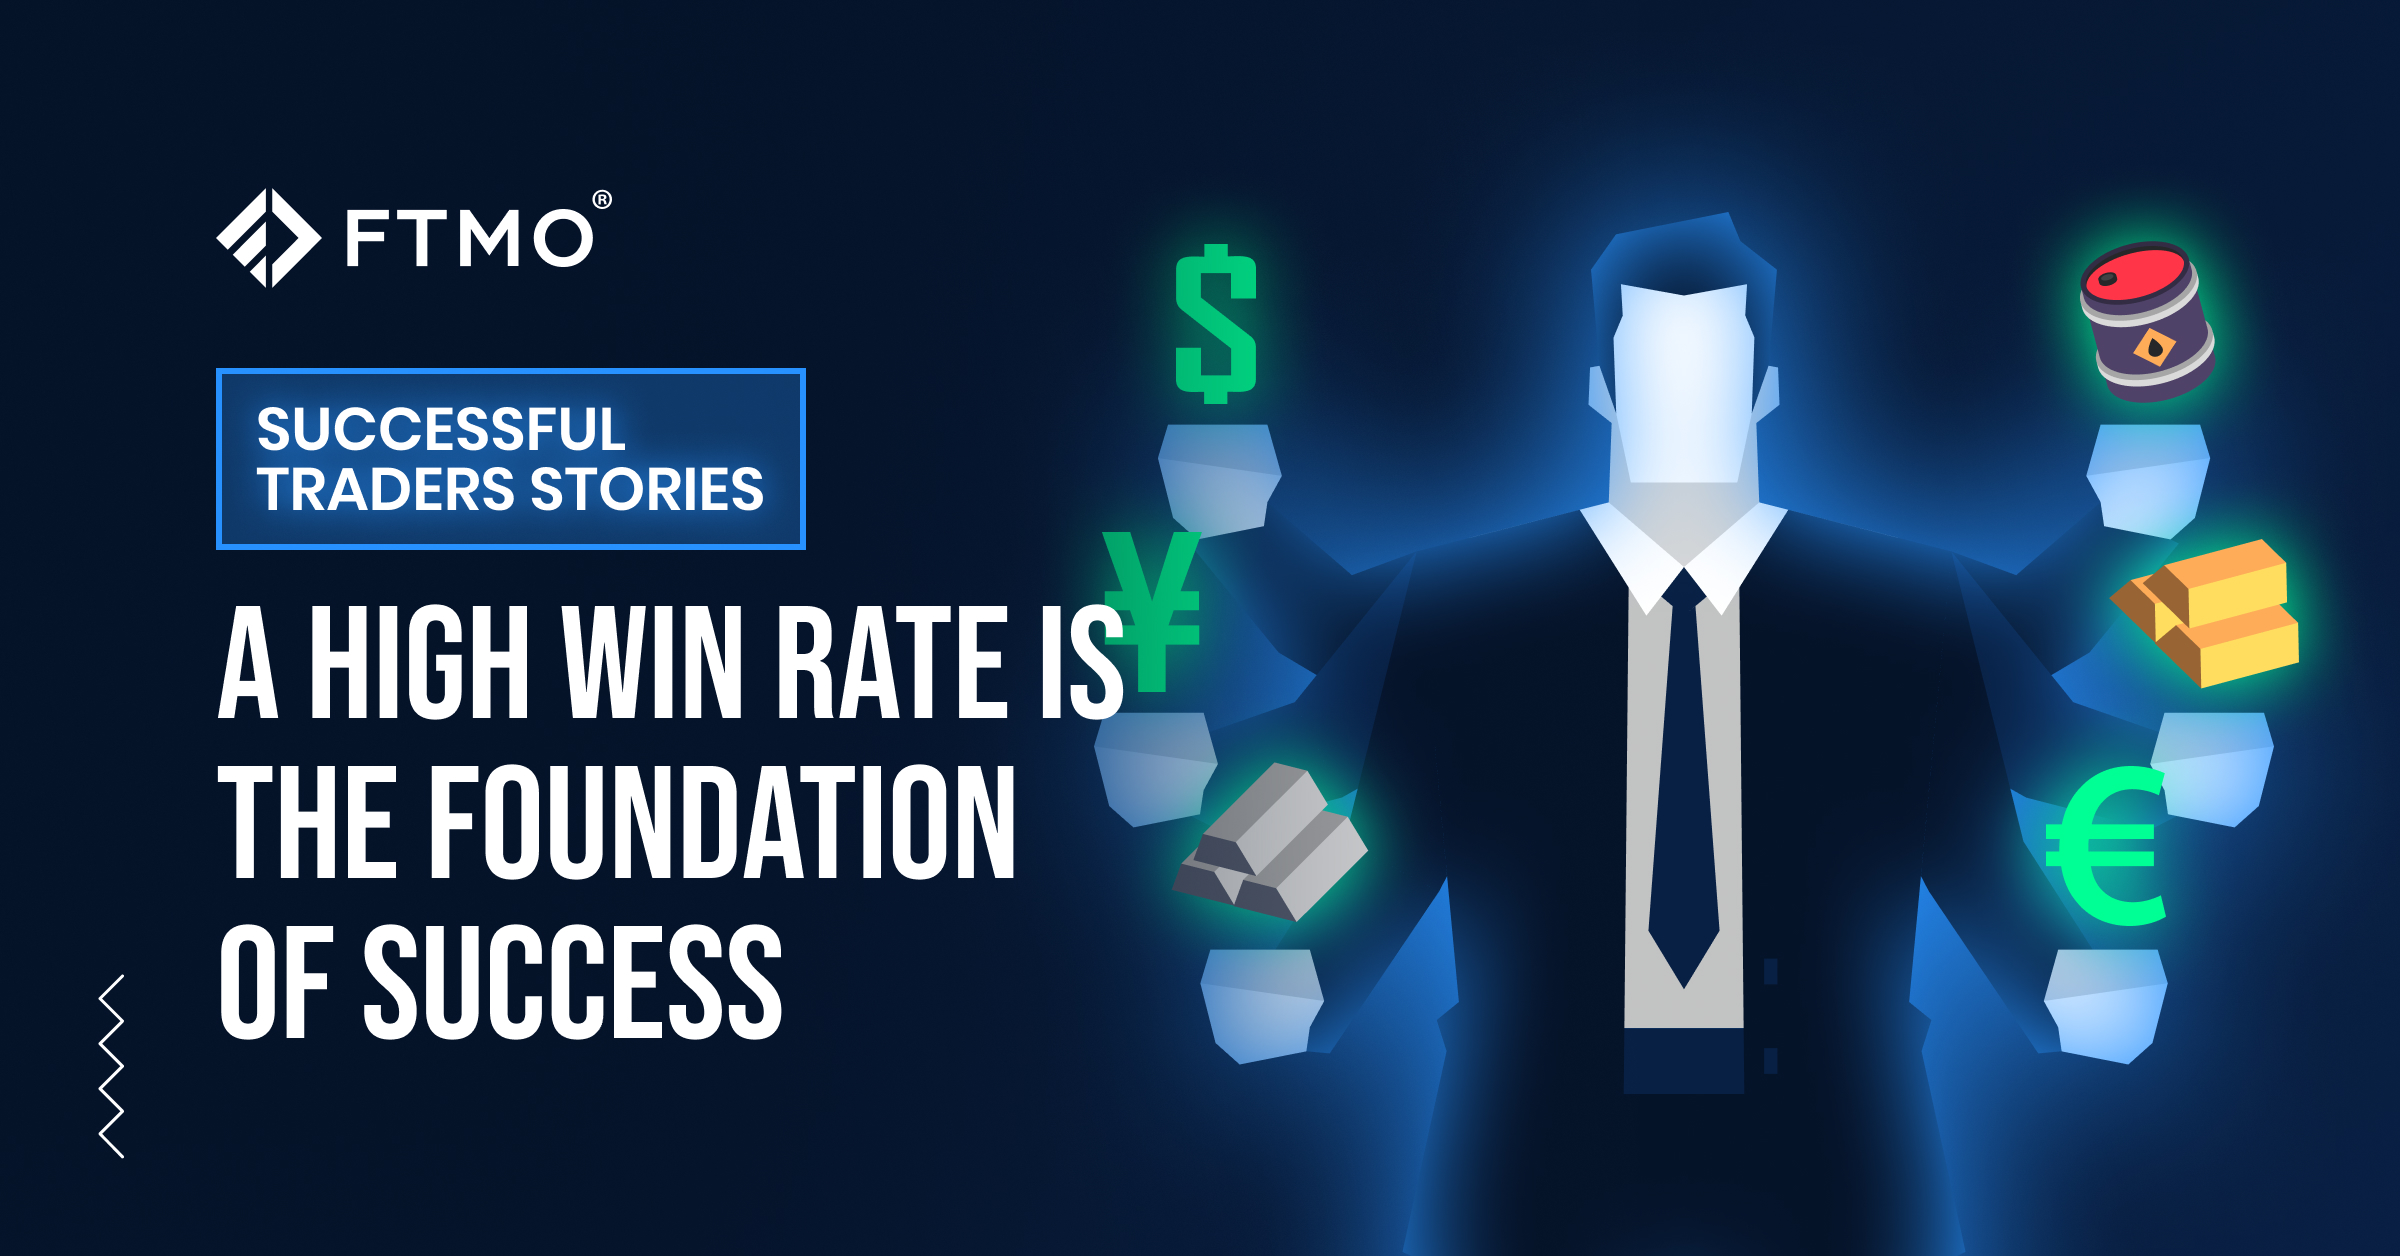 A high win rate is the foundation of success - FTMO